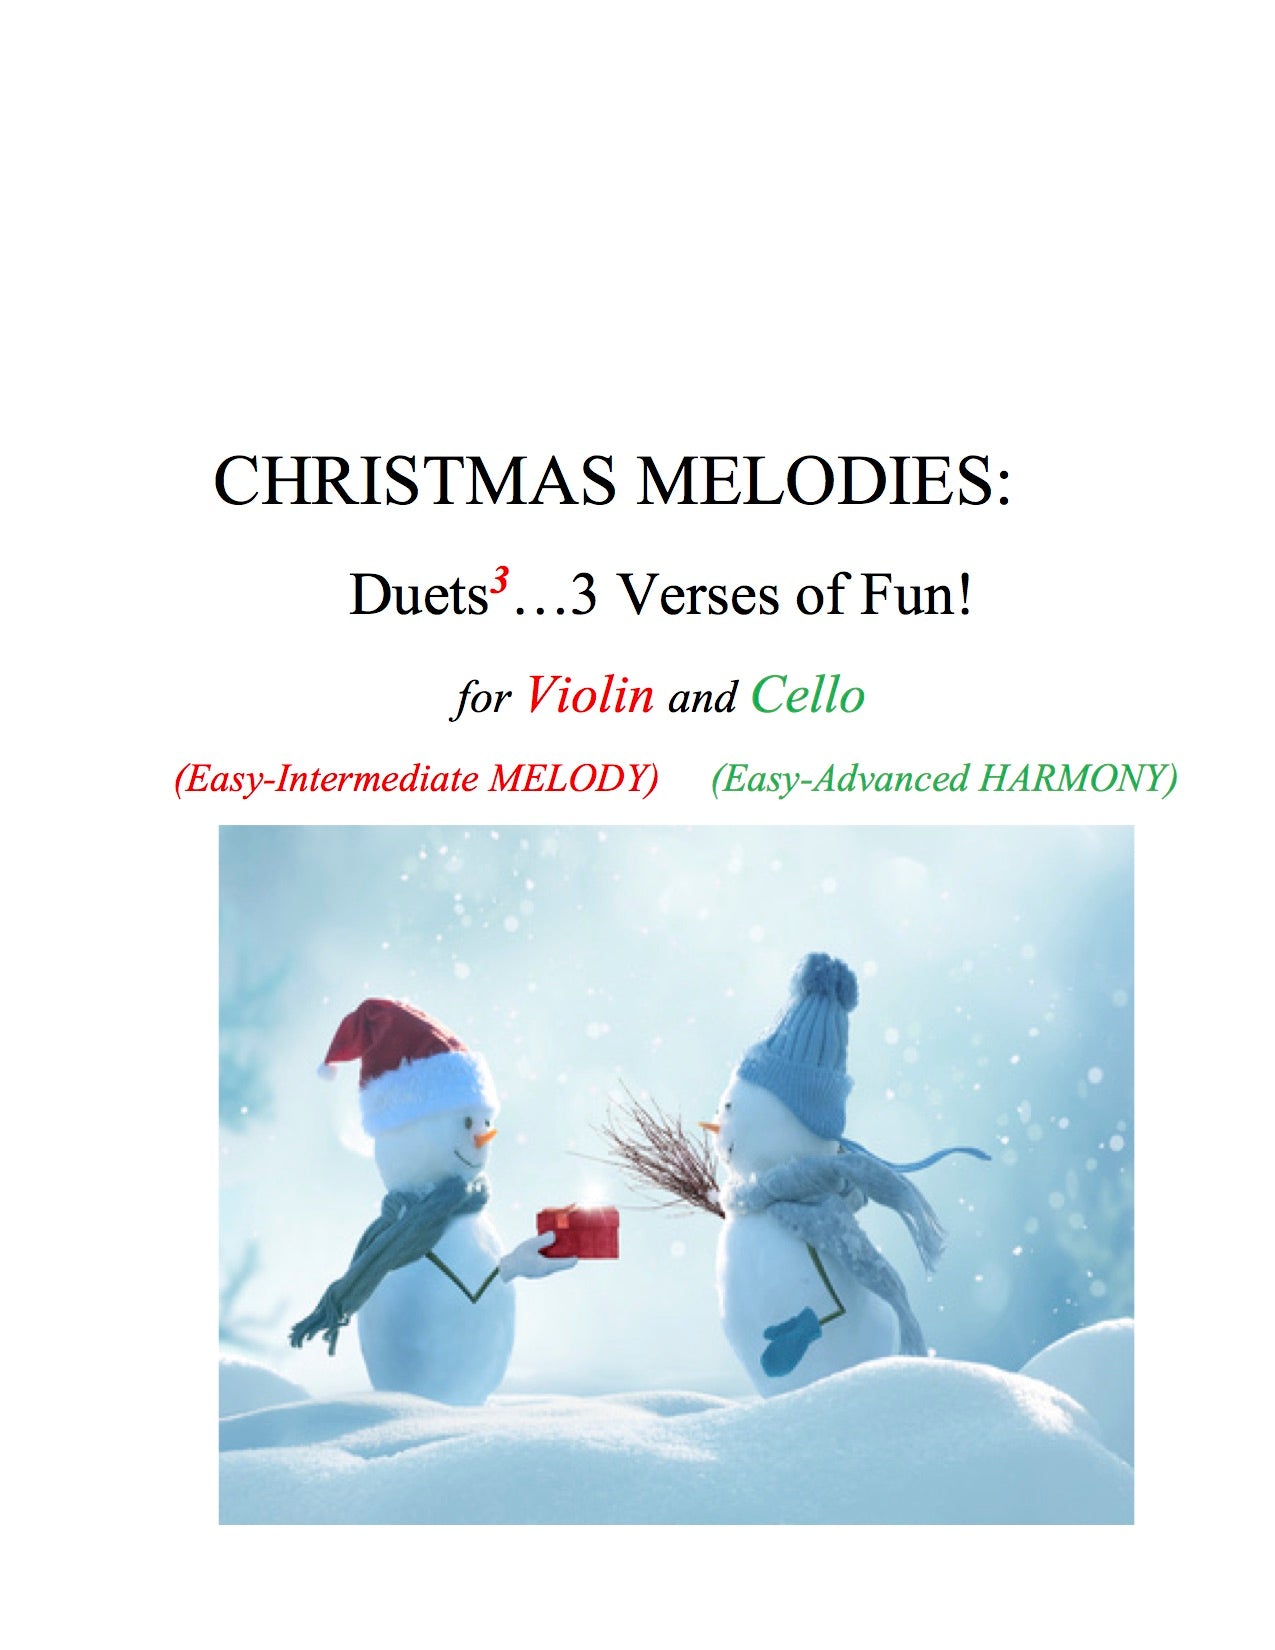 038 - Christmas Melodies For Violin and Cello: DUETS to the 3rd Power... 3 Verses of FUN! Violin (Melody) and Cello (Harmony)